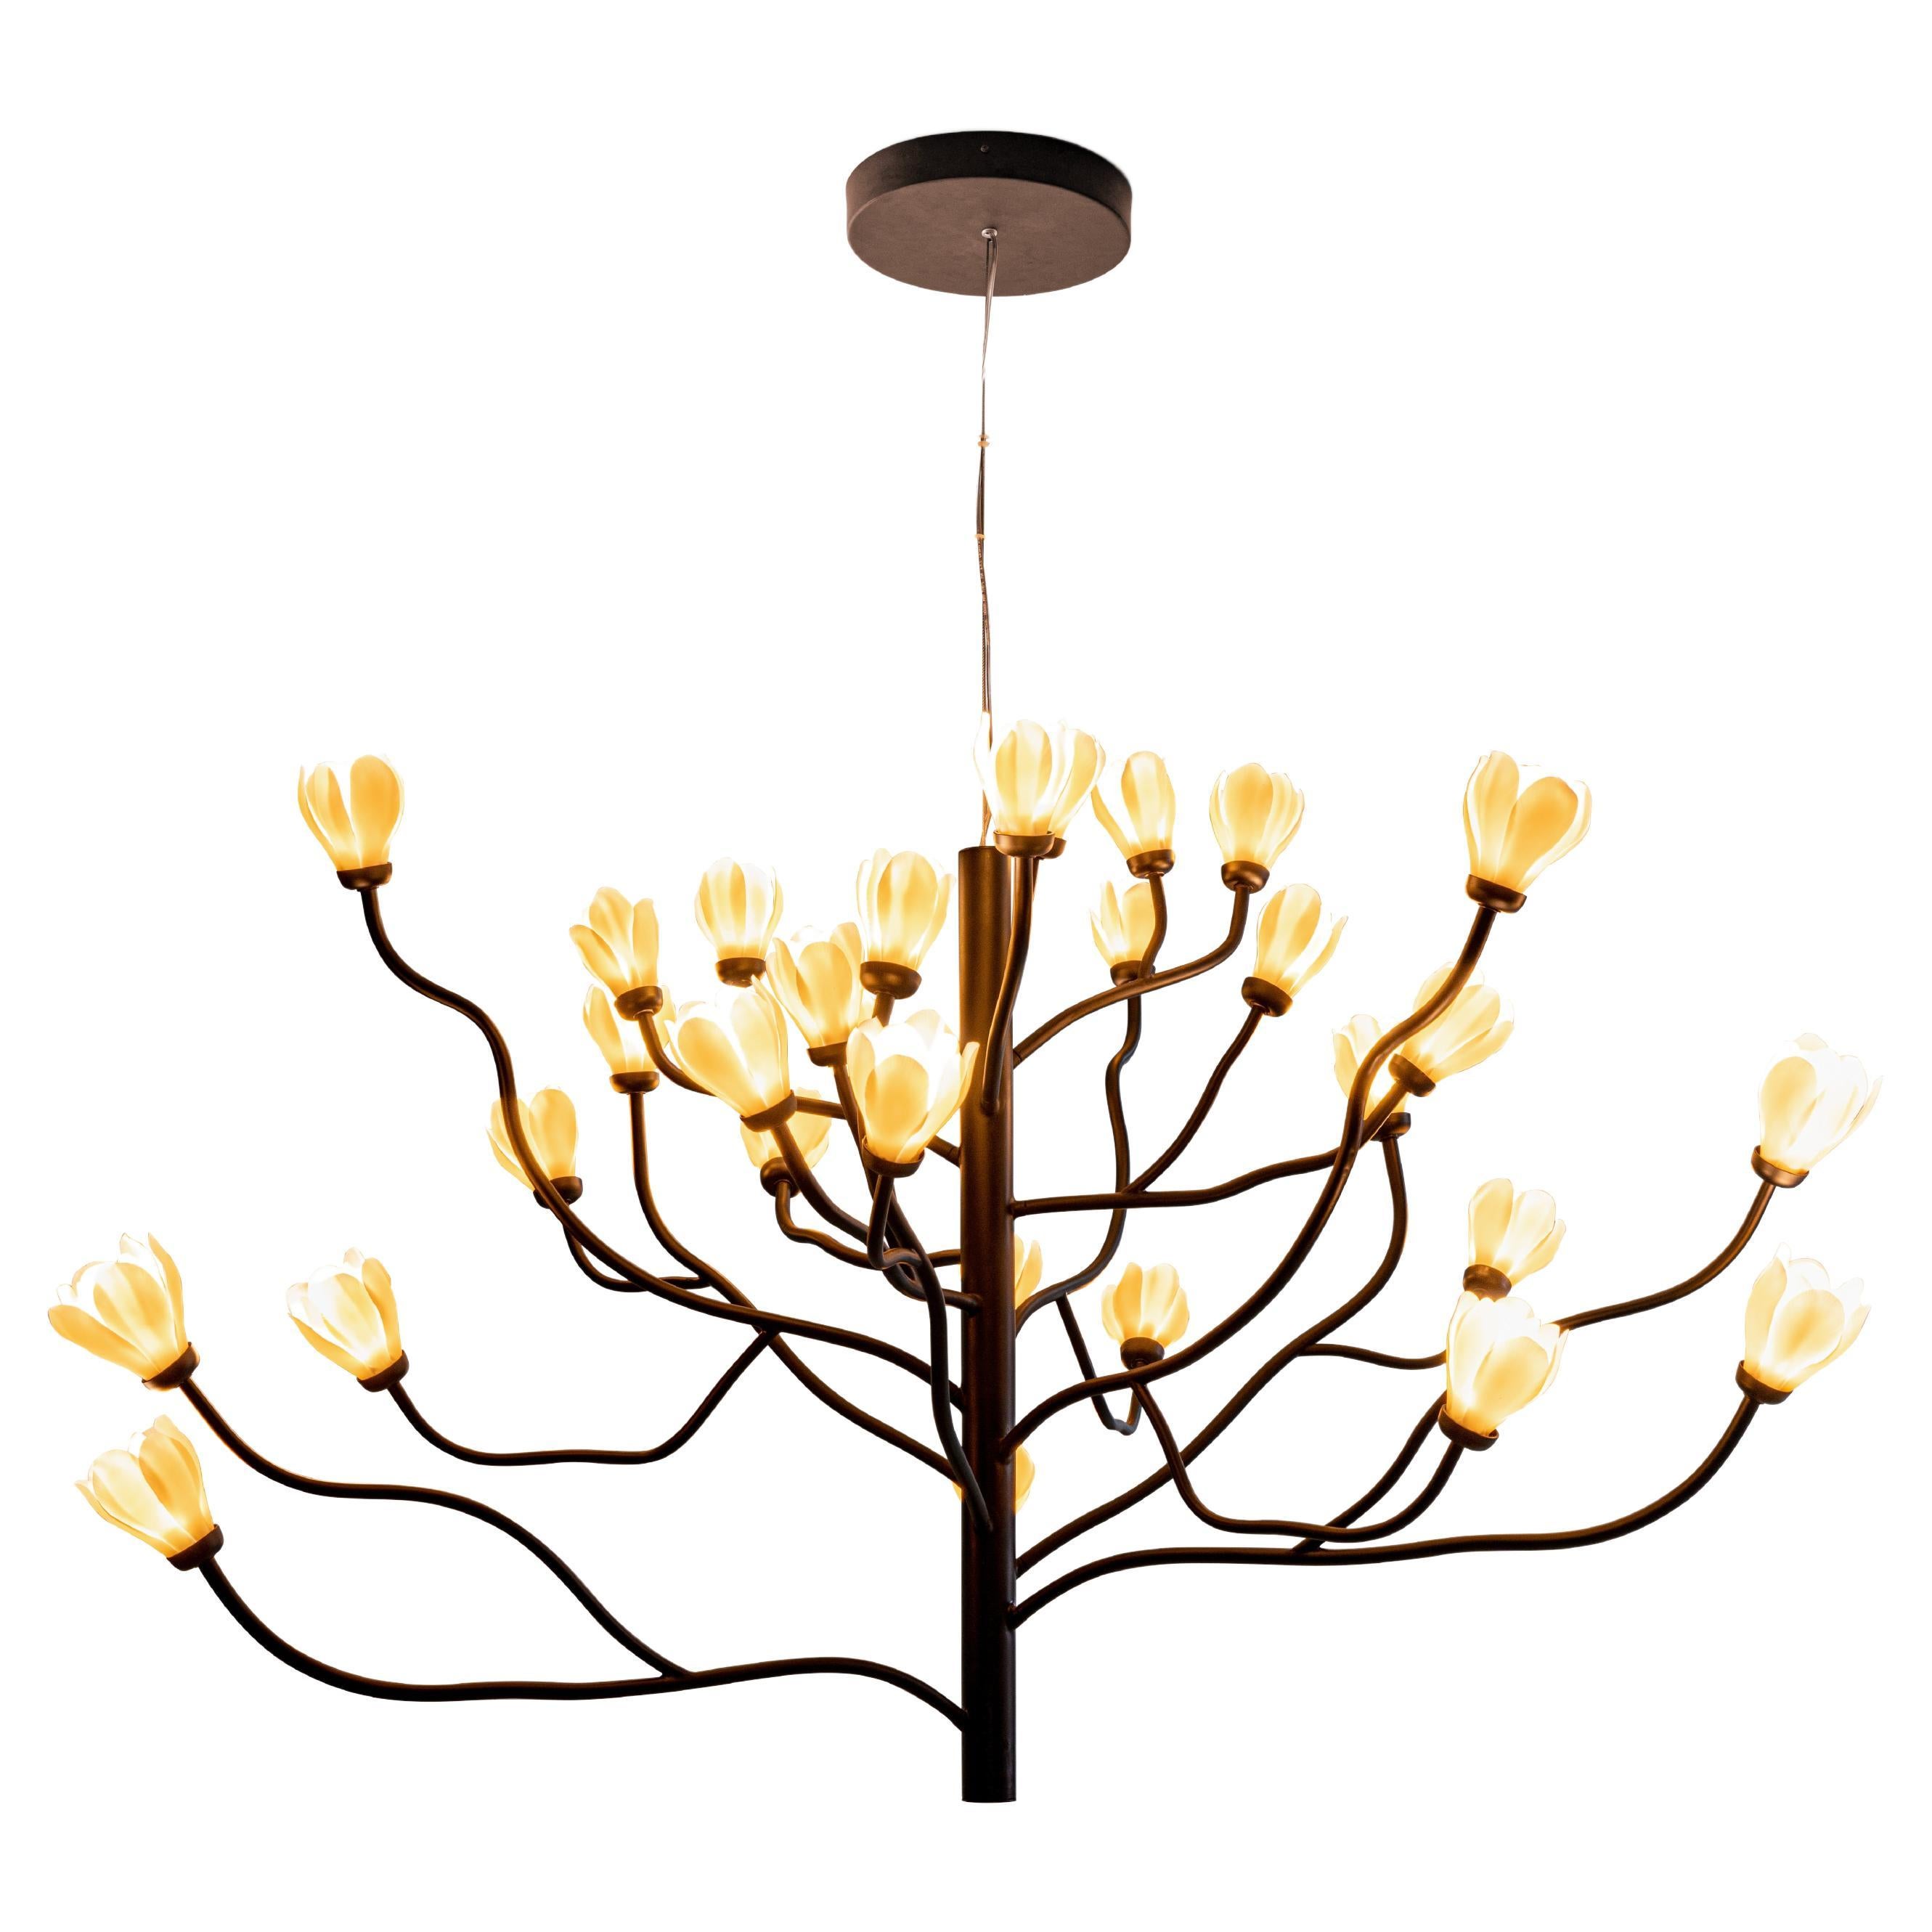 Aluminum metal and matte porcelain chandelier inspired by the white magnolia tree. MOKUREN / LIGHTING WITH SOUL - Mokuren is the result of the first collaboration between Lladró and Japanese designer Naoto Fukasawa, who is known for combining